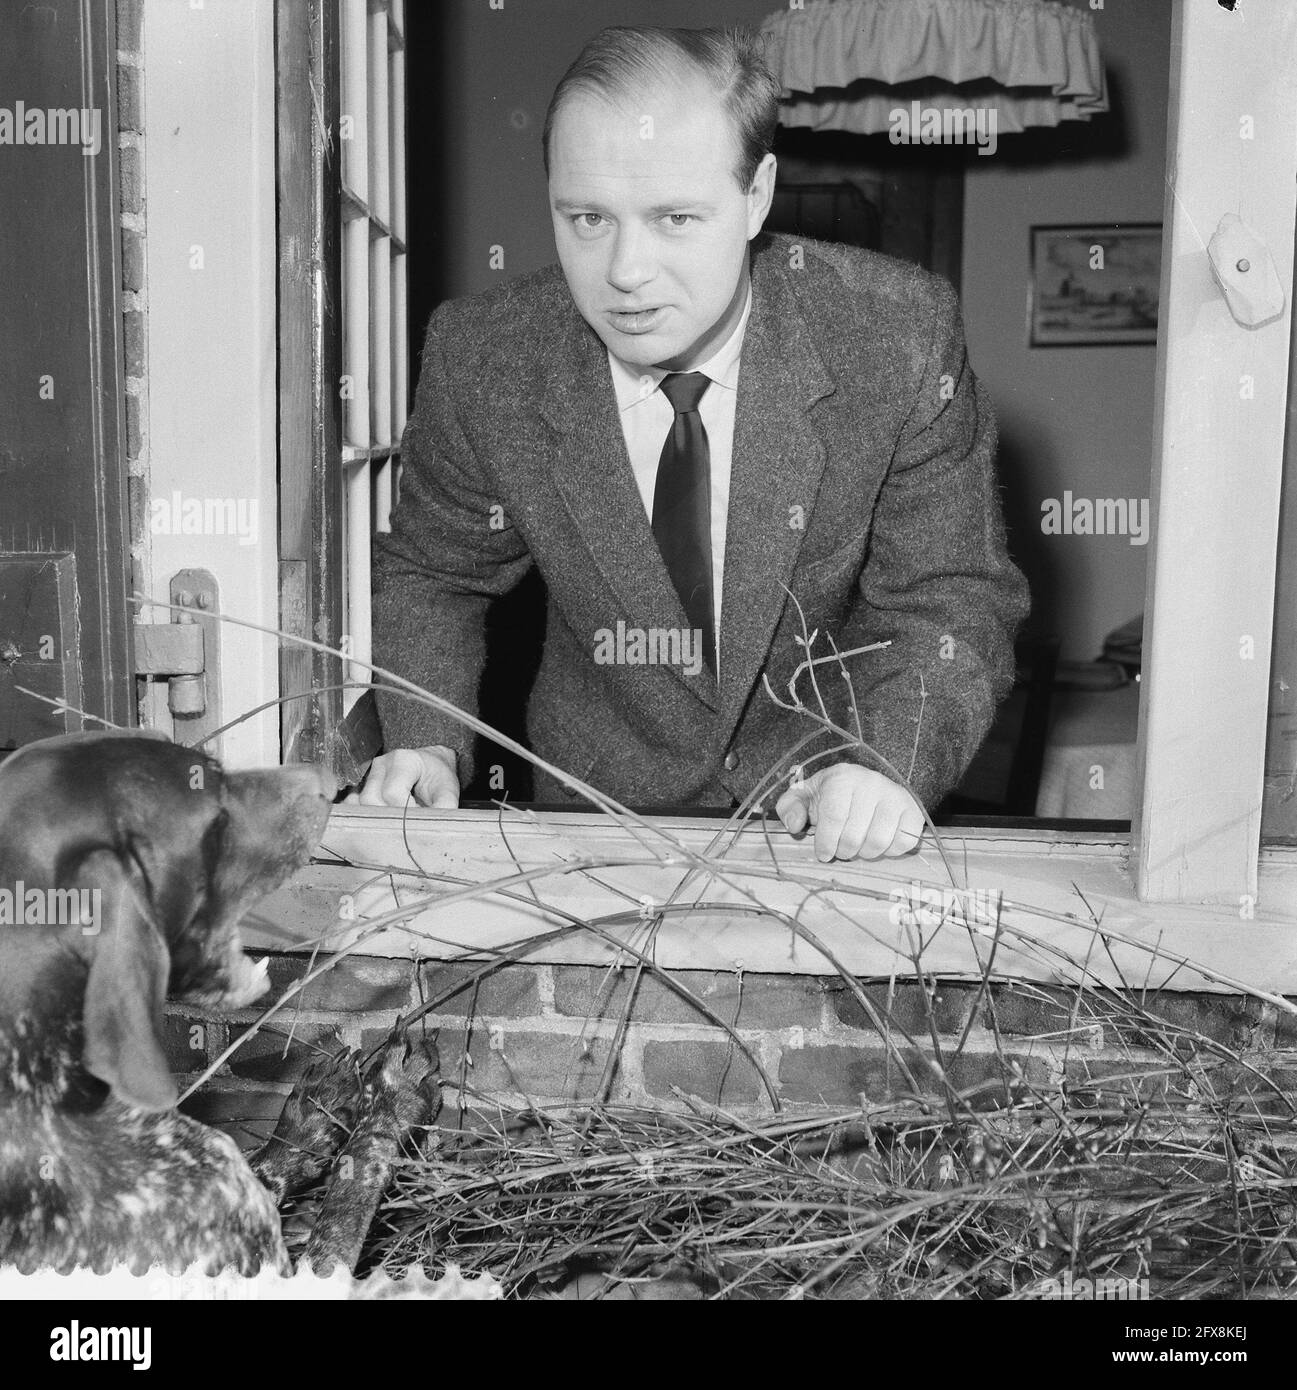 Bernhard Haitink offered the position as director of the Minneapolis Symphony Orchestra, December 30, 1959, conductors, dogs, music, orchestras, portraits, The Netherlands, 20th century press agency photo, news to remember, documentary, historic photography 1945-1990, visual stories, human history of the Twentieth Century, capturing moments in time Stock Photo